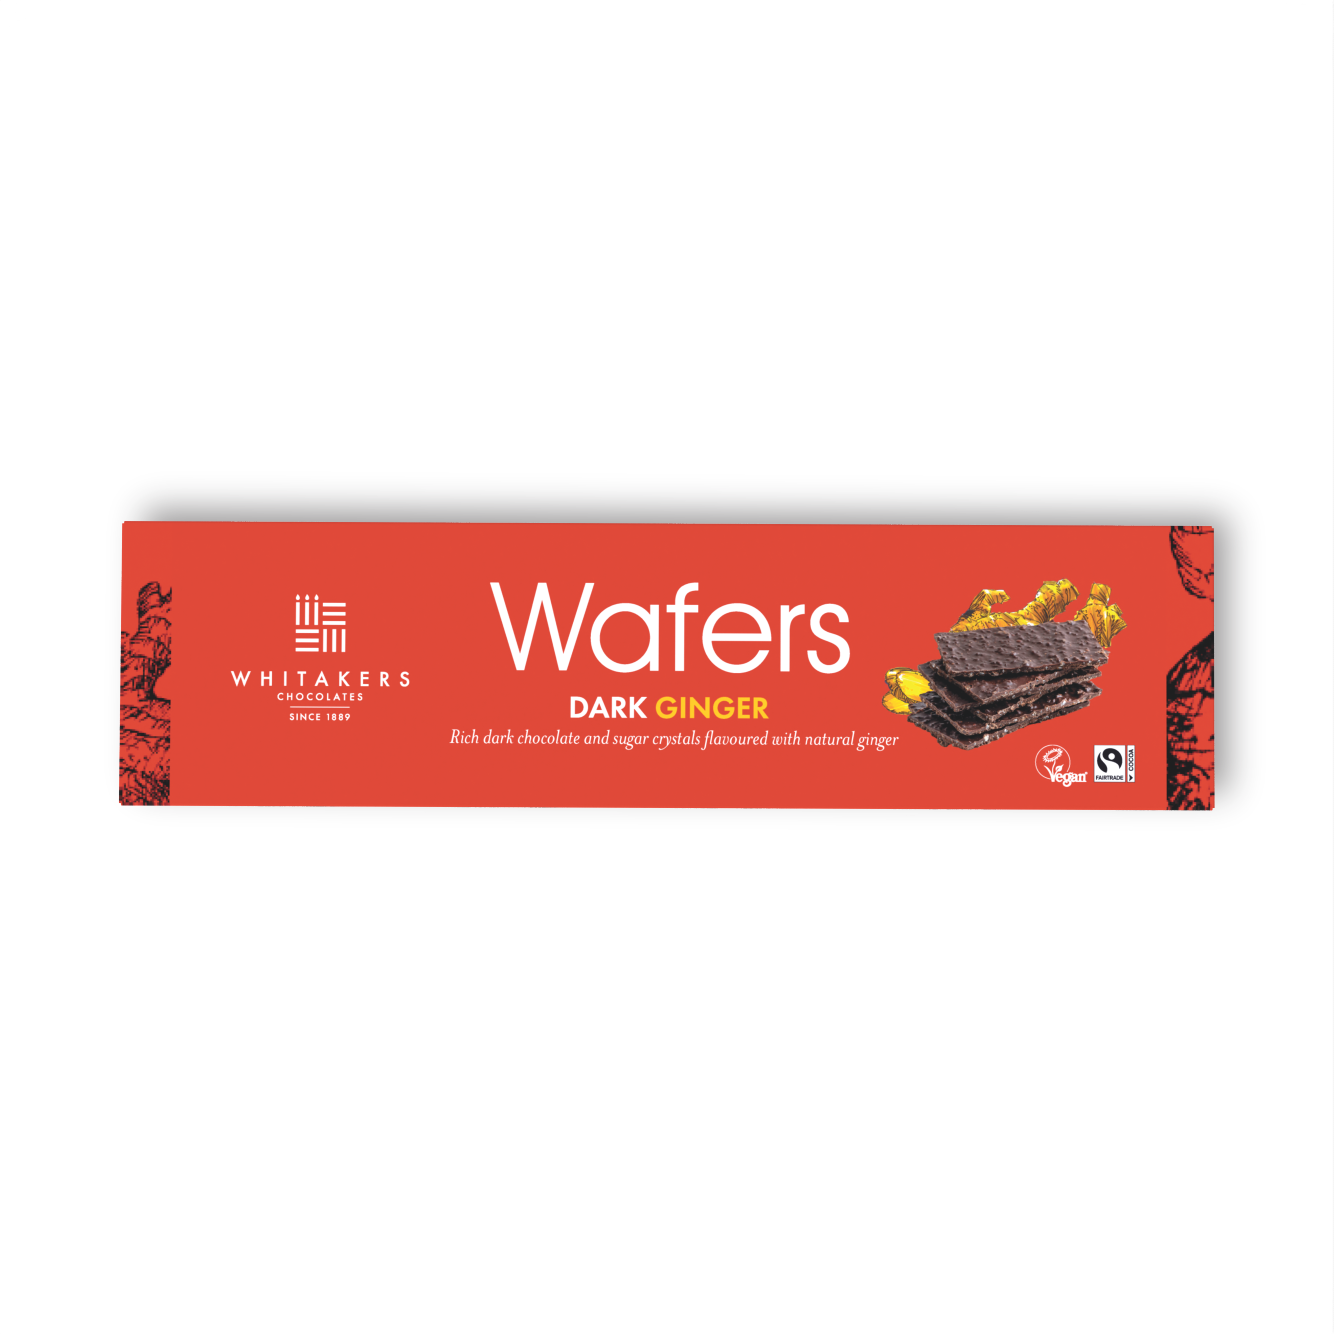 Ginger Oil Sugar Crisp Wafer Thins, an exquisite blend of our rich signature dark chocolate with the aromatic zest of ginger oil, complemented by the unique crunch of sugar crisp inclusions. All encased in a resealable gift box